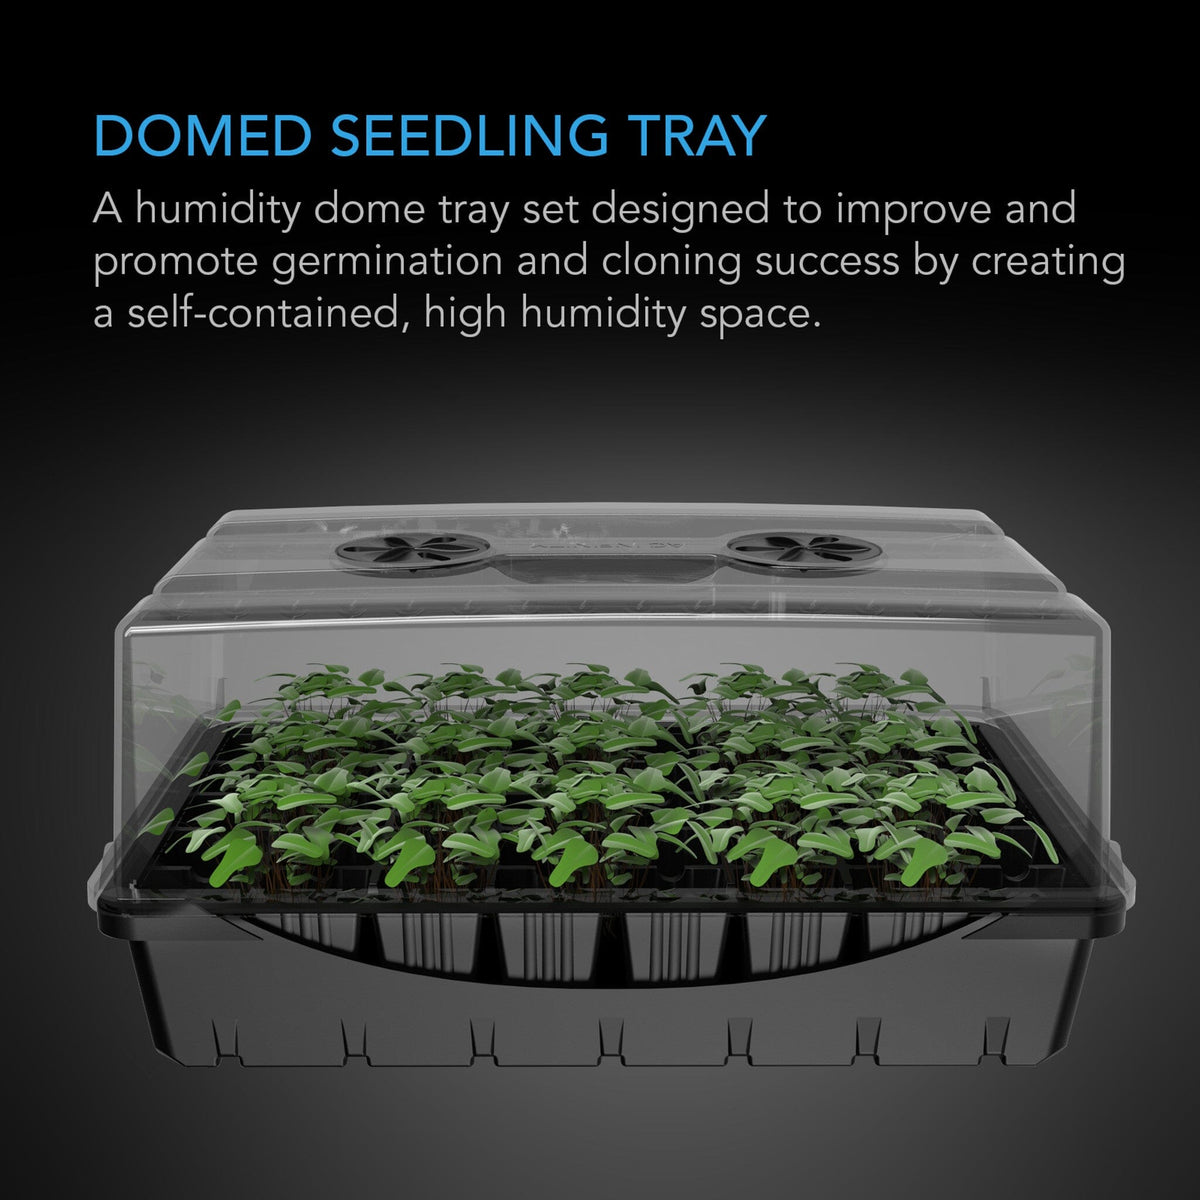 Domed Seedling Tray